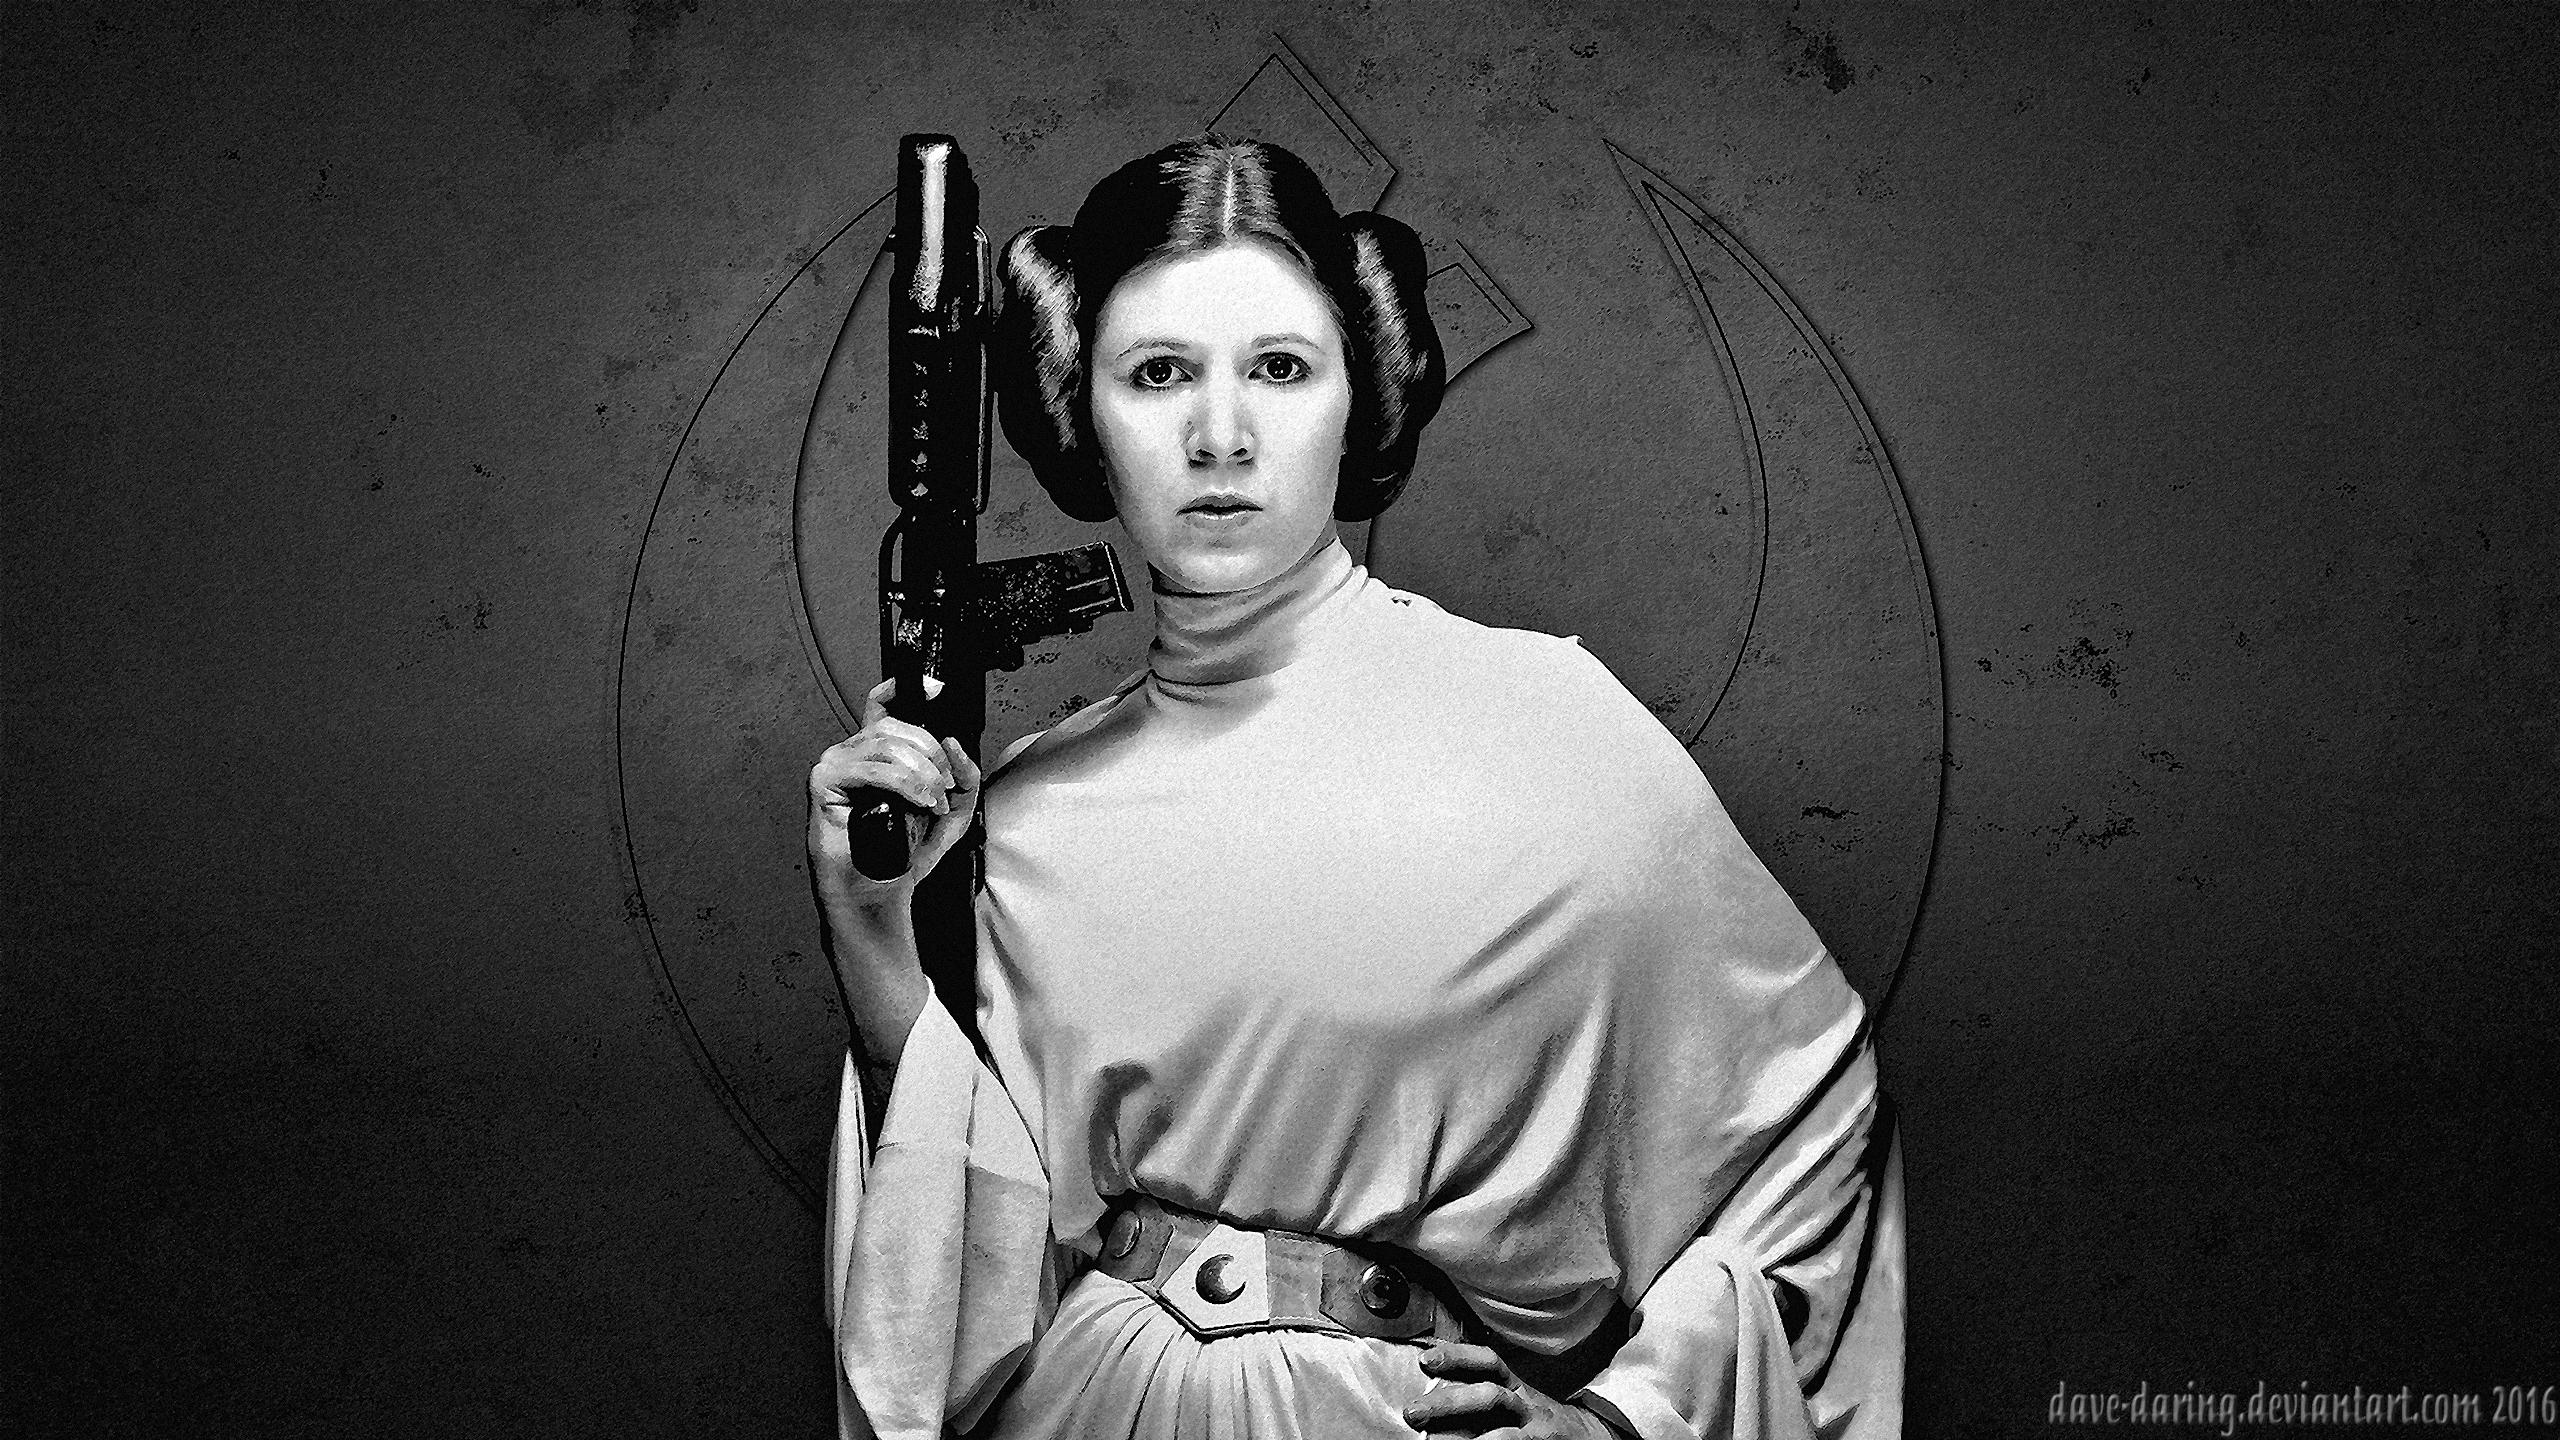 Free Download 1280x960 Starwars Princess Leia Desktop Pc And Mac Wallpaper [1280x960] For Your